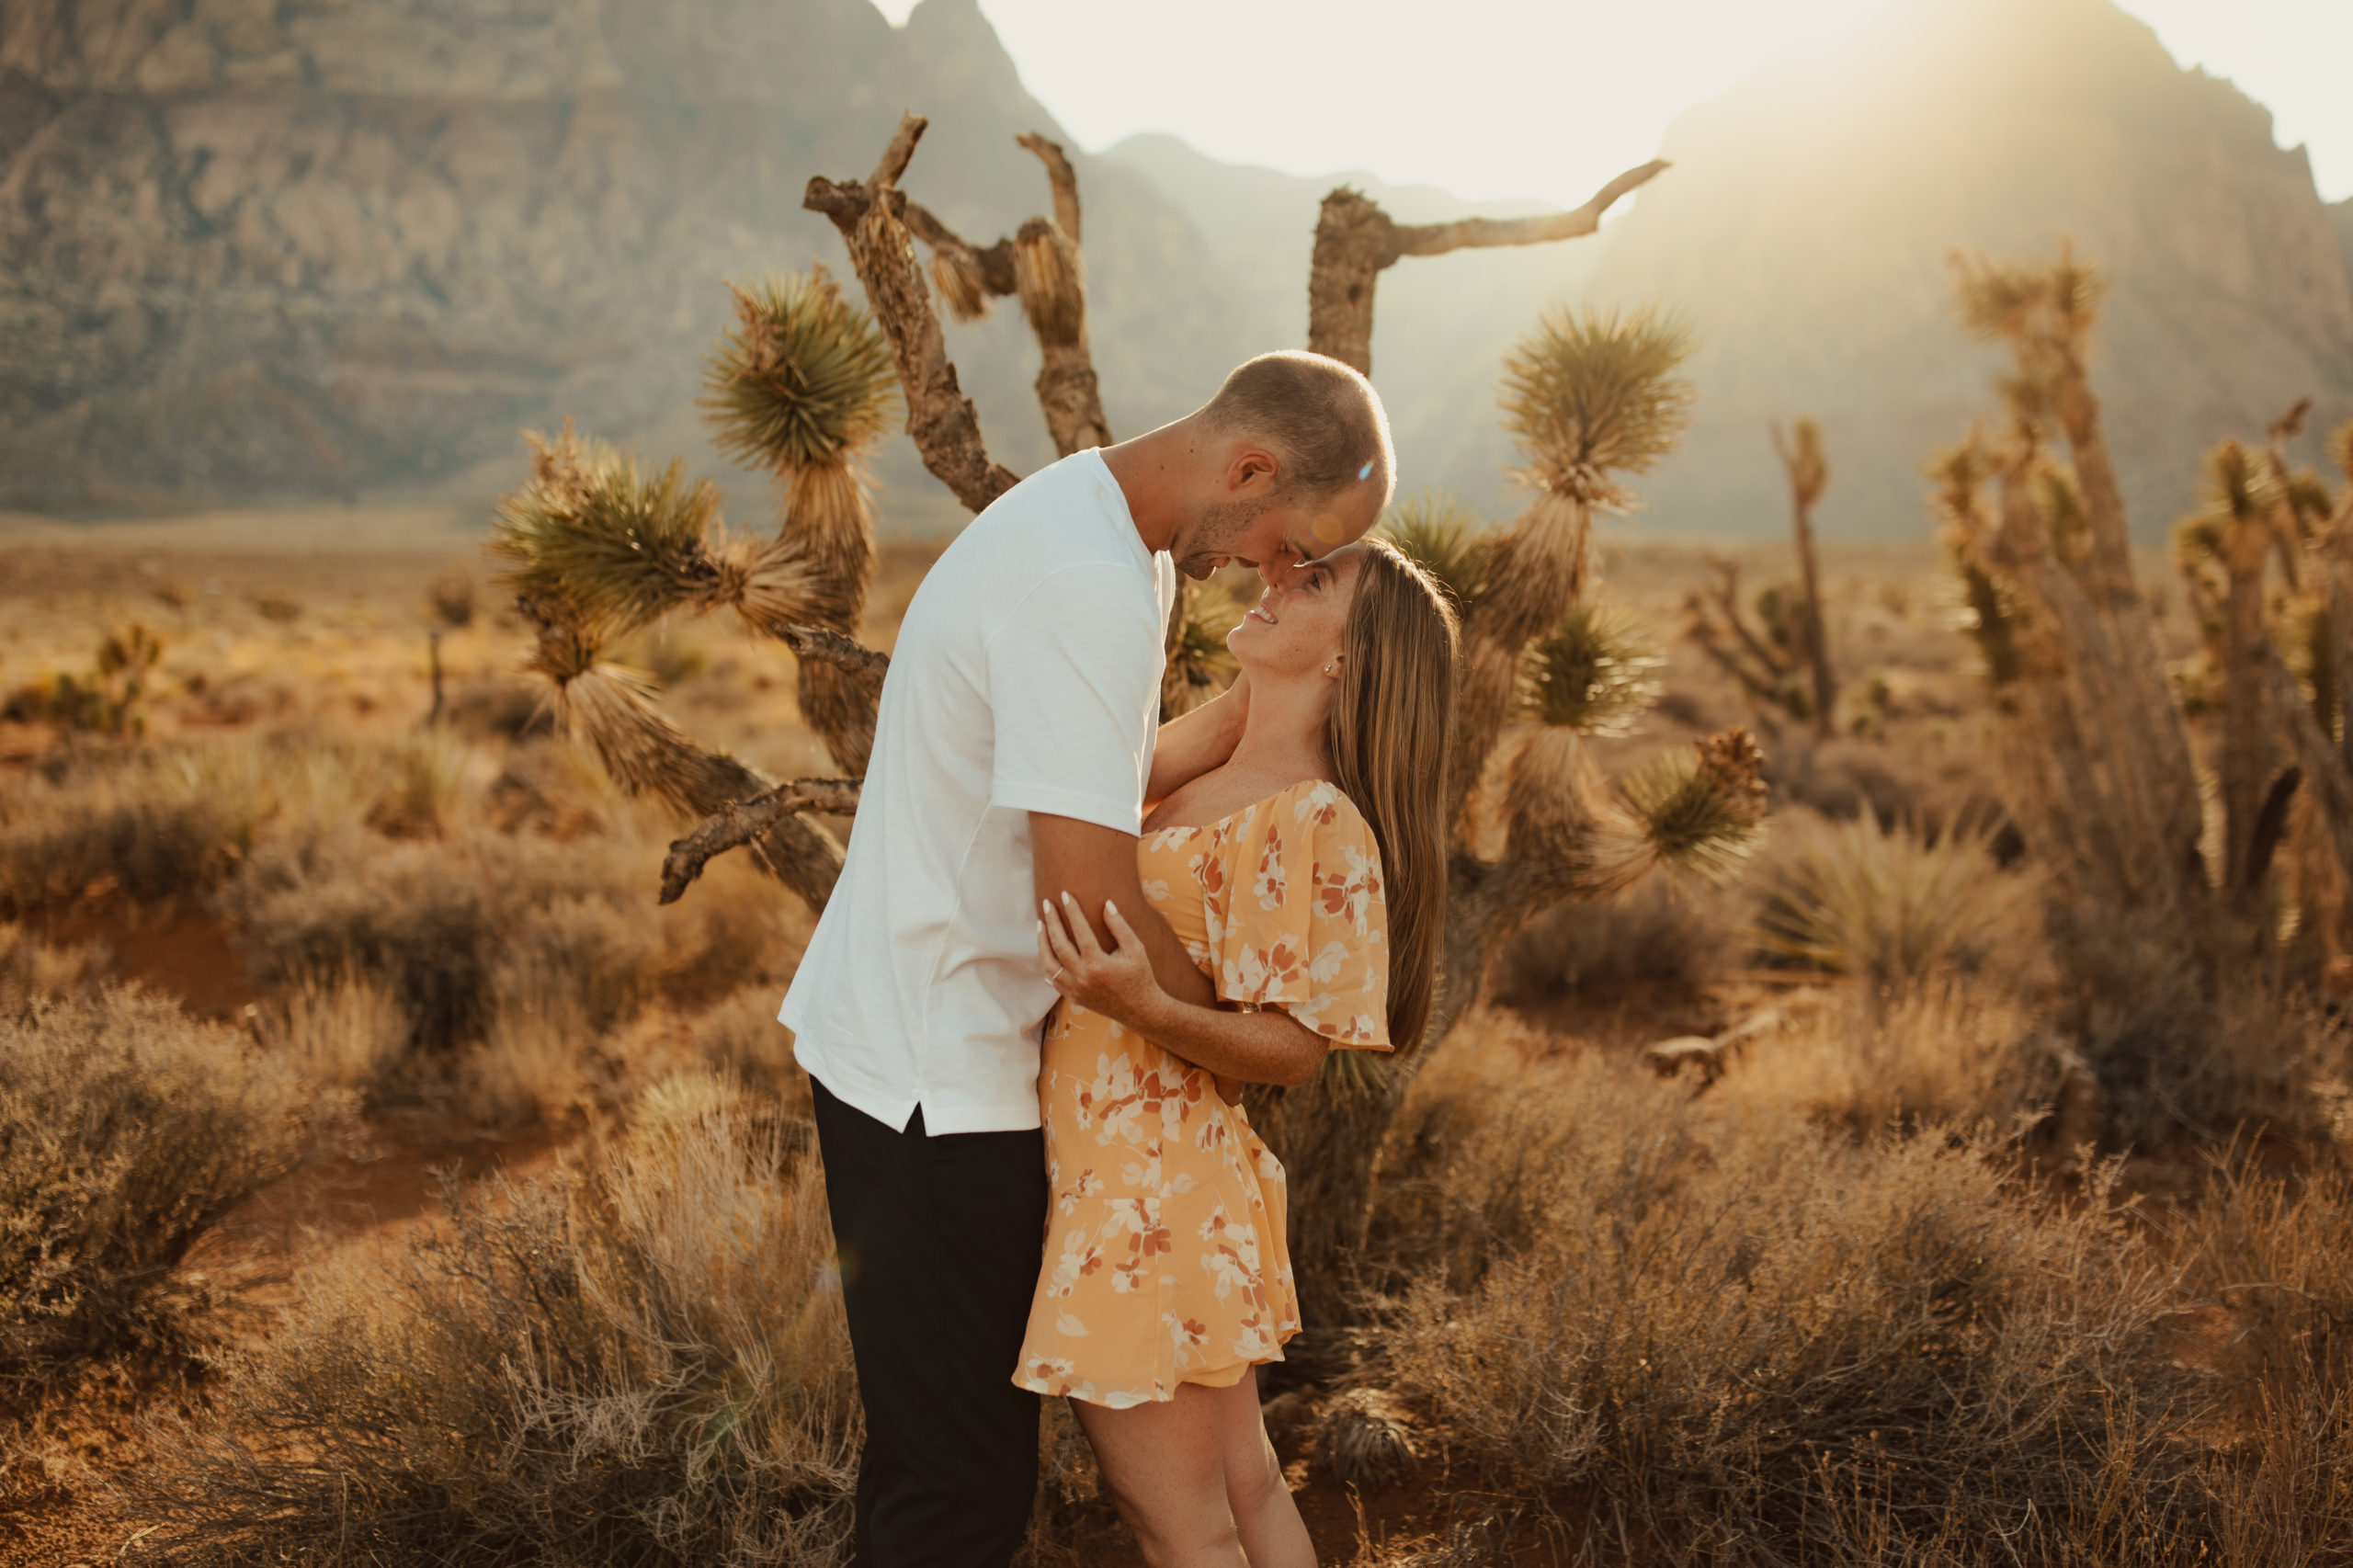 couple kissing in front of a tree in the desert